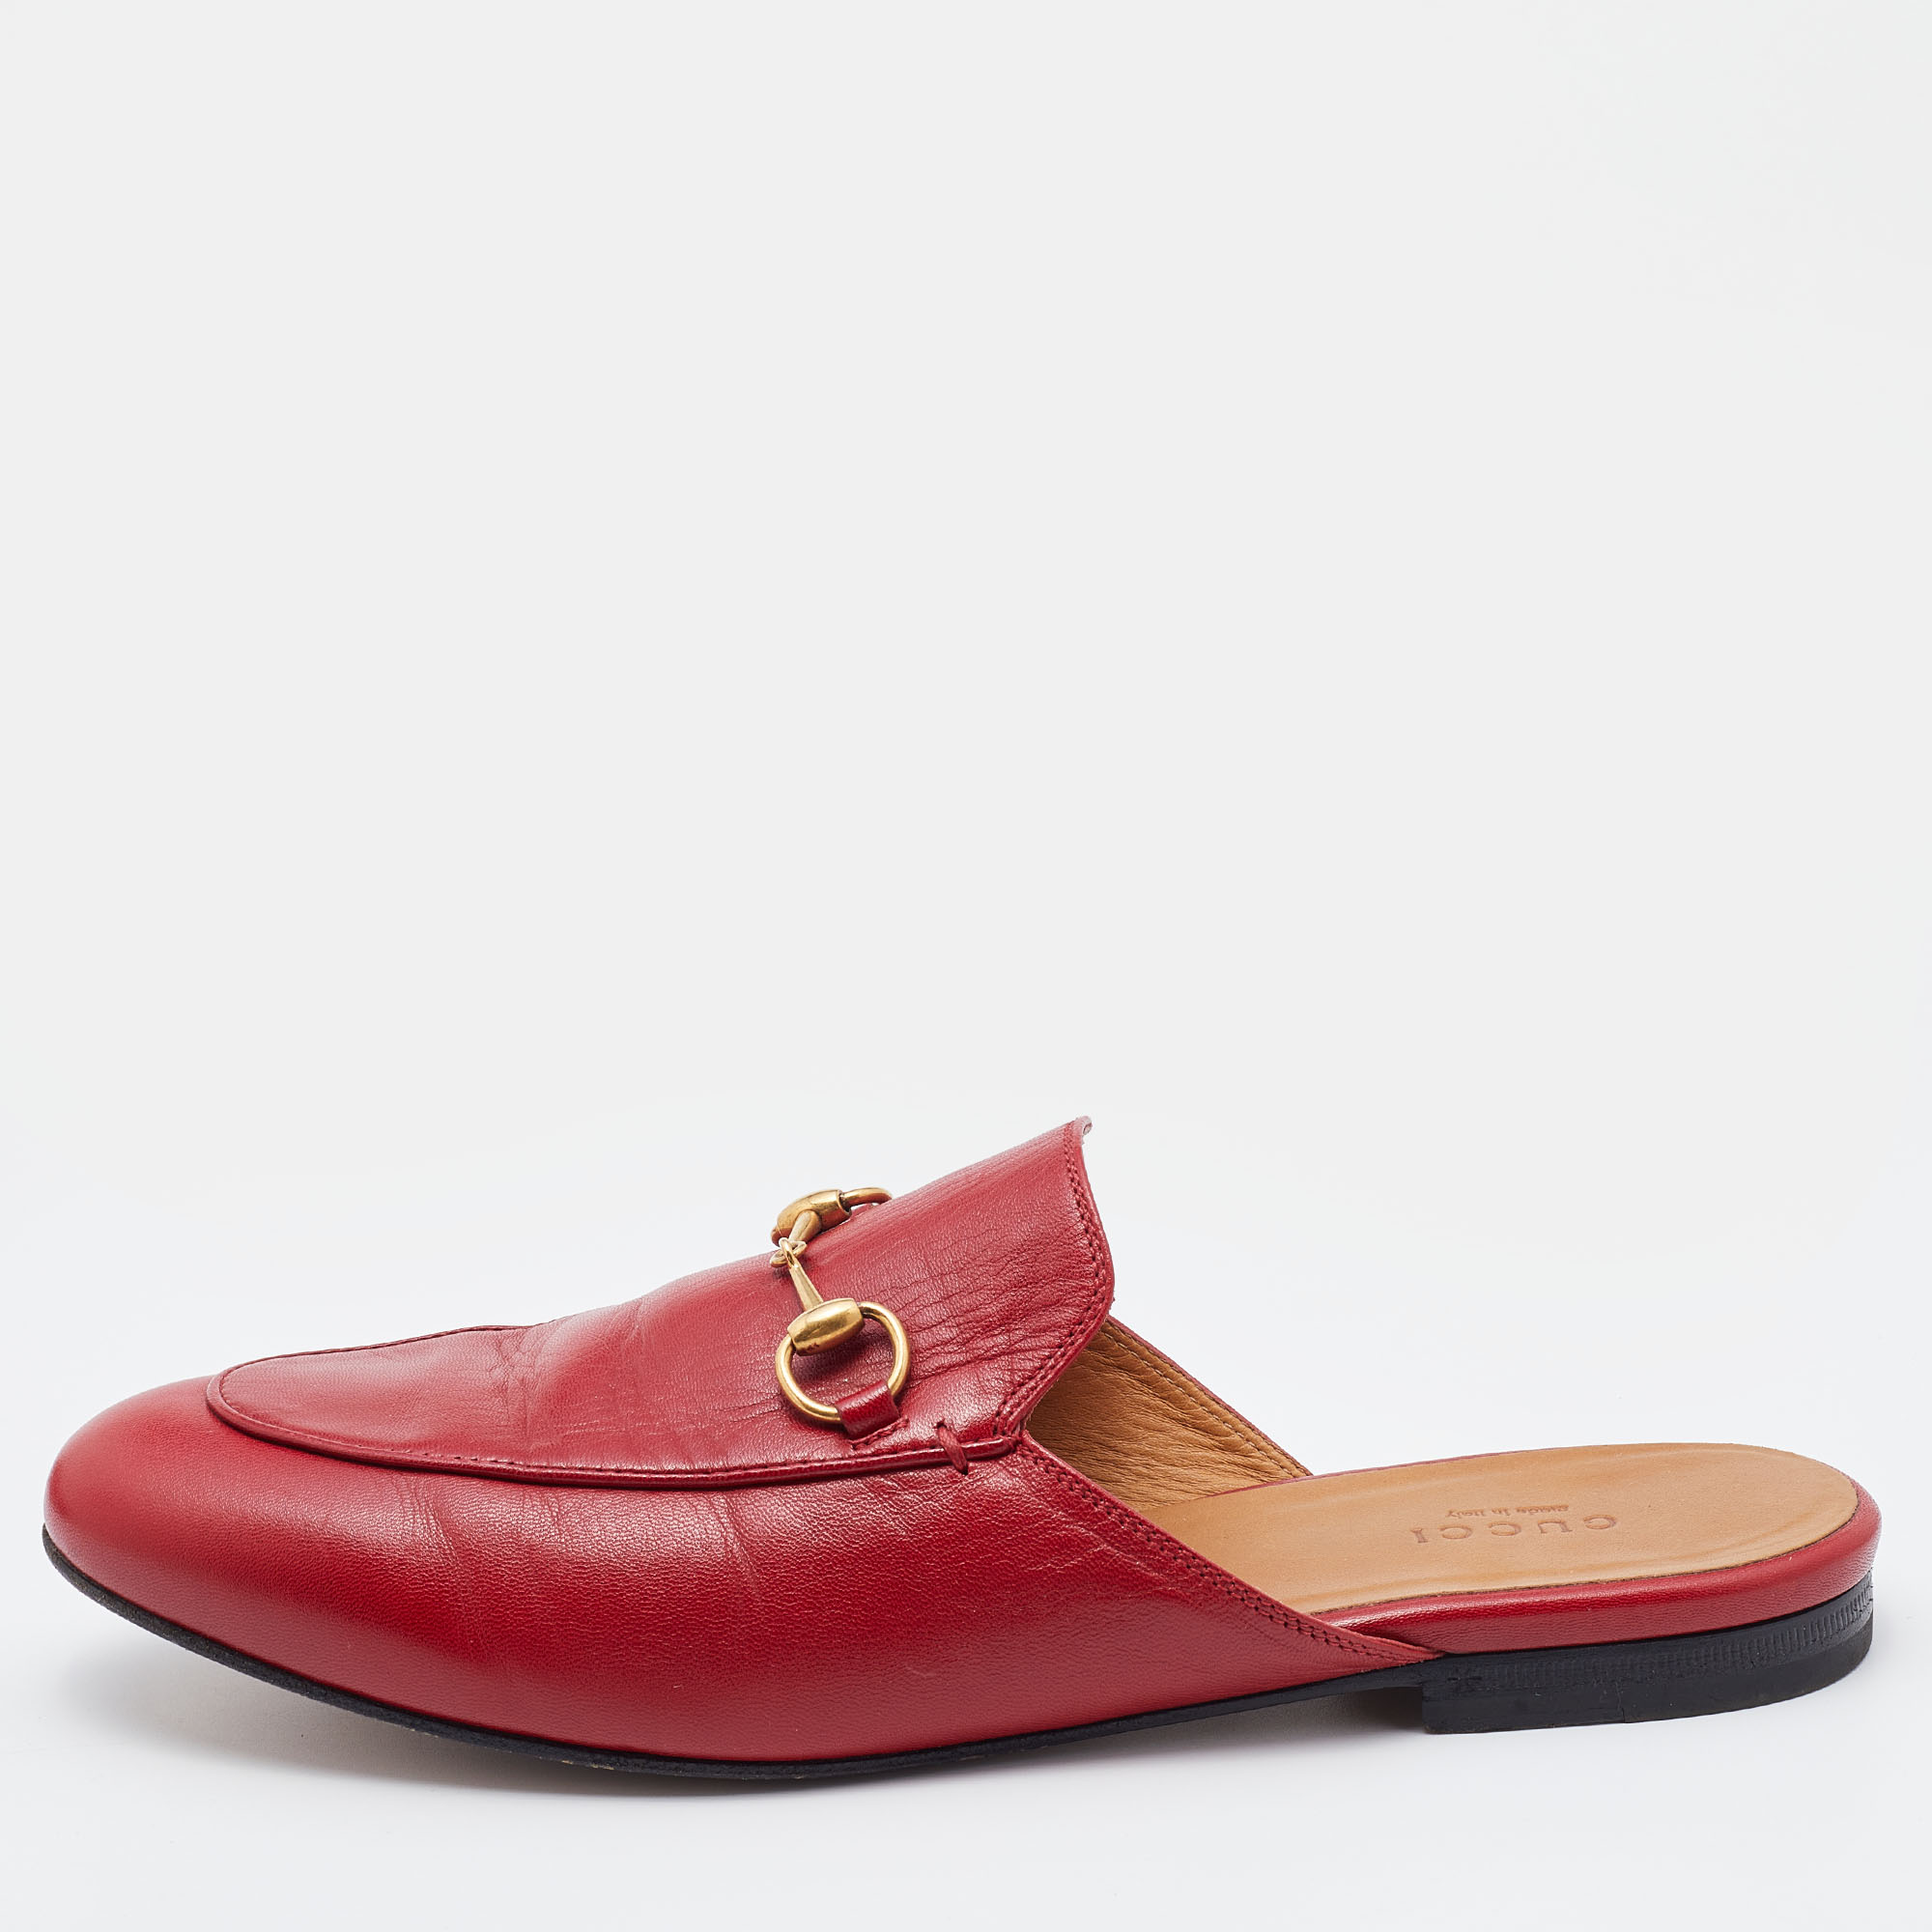 Pre-owned Gucci Red Leather Princetown Horsebit Flat Mules Size 39.5